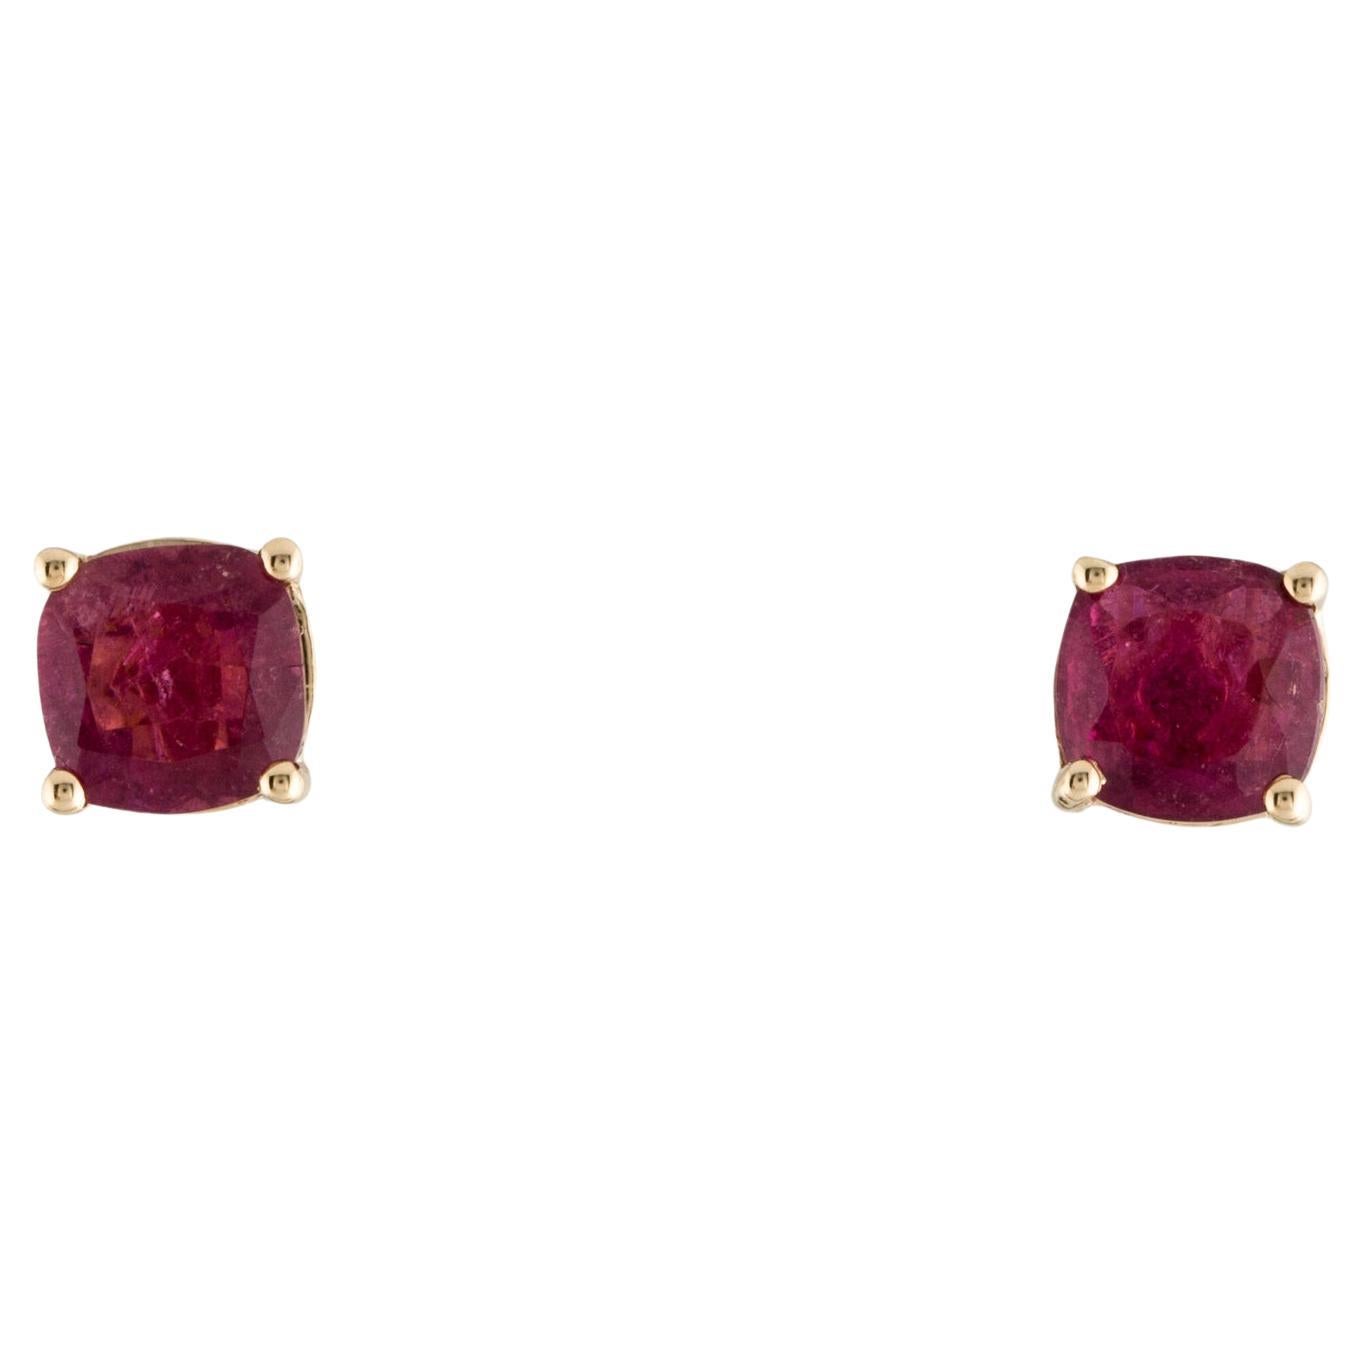 Exquisite 14K Tourmaline Stud Earrings - Stunning & Timeless Glamour Jewelry